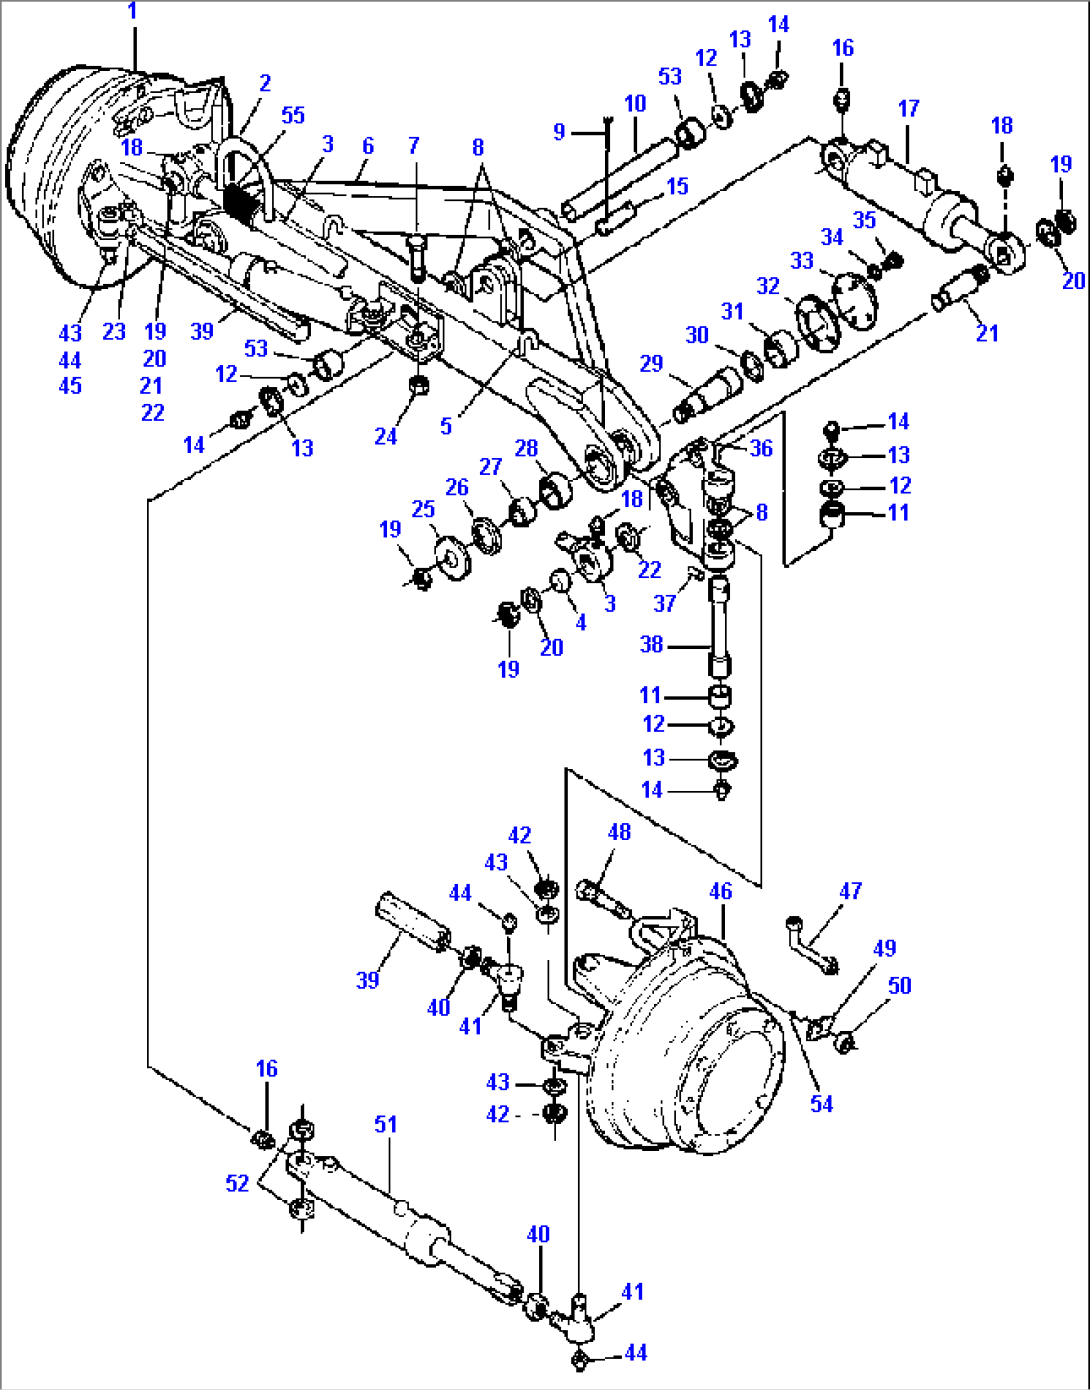 ALL WHEEL DRIVE FRONT AXLE MACHINES WITHOUT FRONT FENDERS